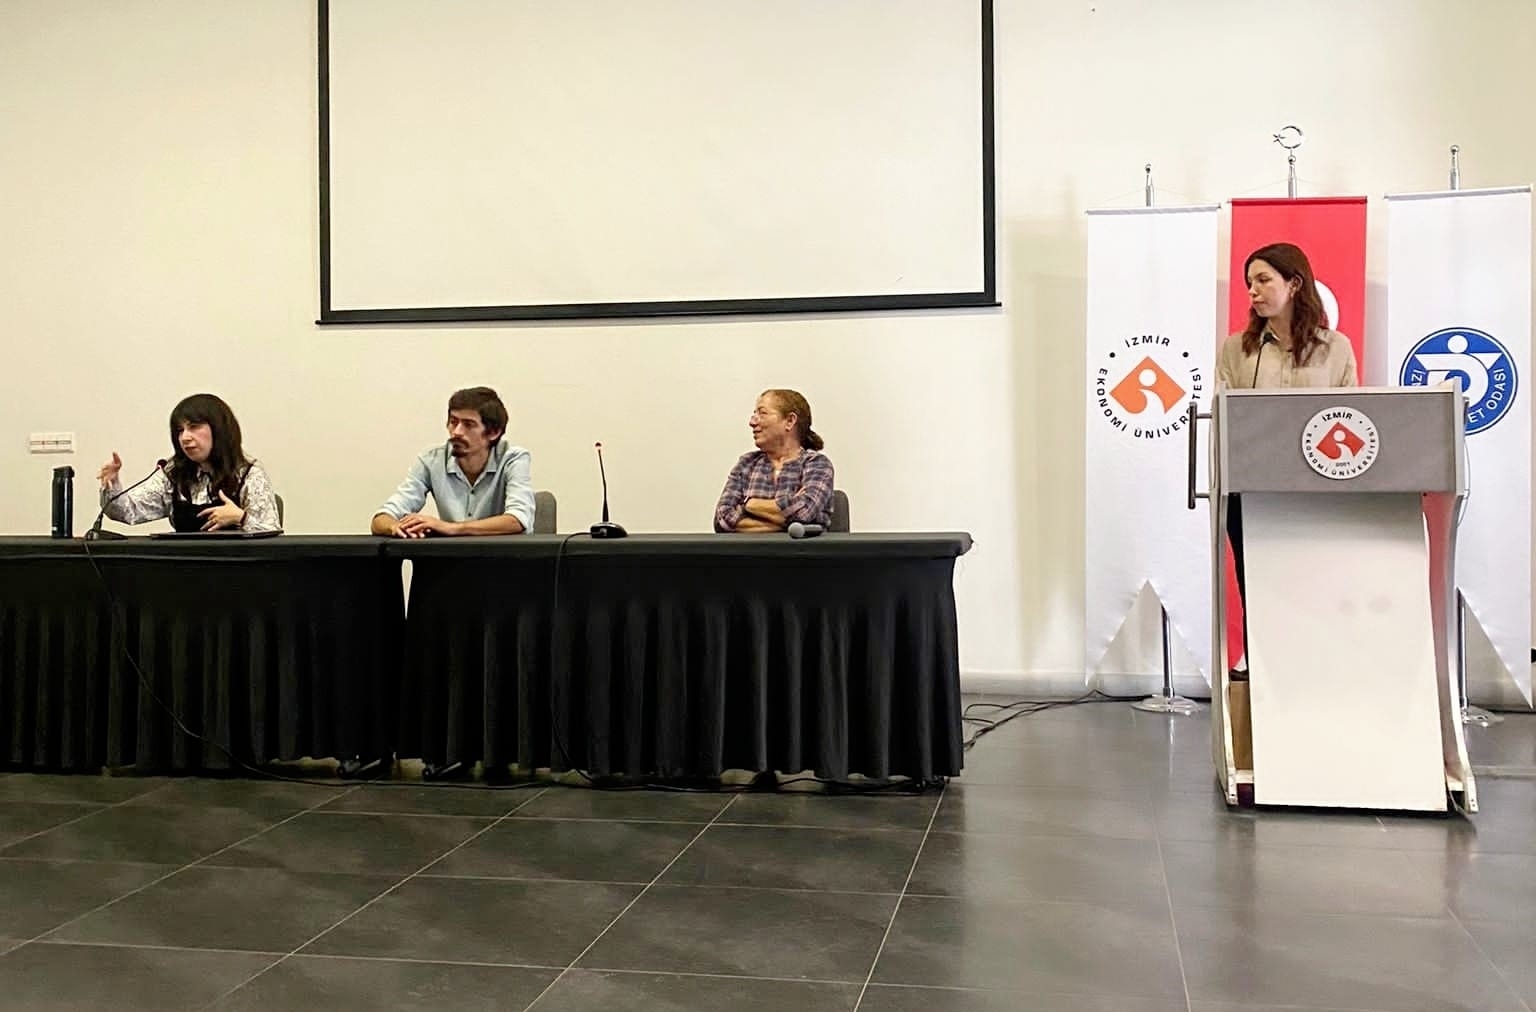 Within the framework of International Translation Day, IUE Department of English Translation and Interpreting, Faculty of Arts and Sciences, organized a panel titled "Current Approaches in Audiovisual Translation".